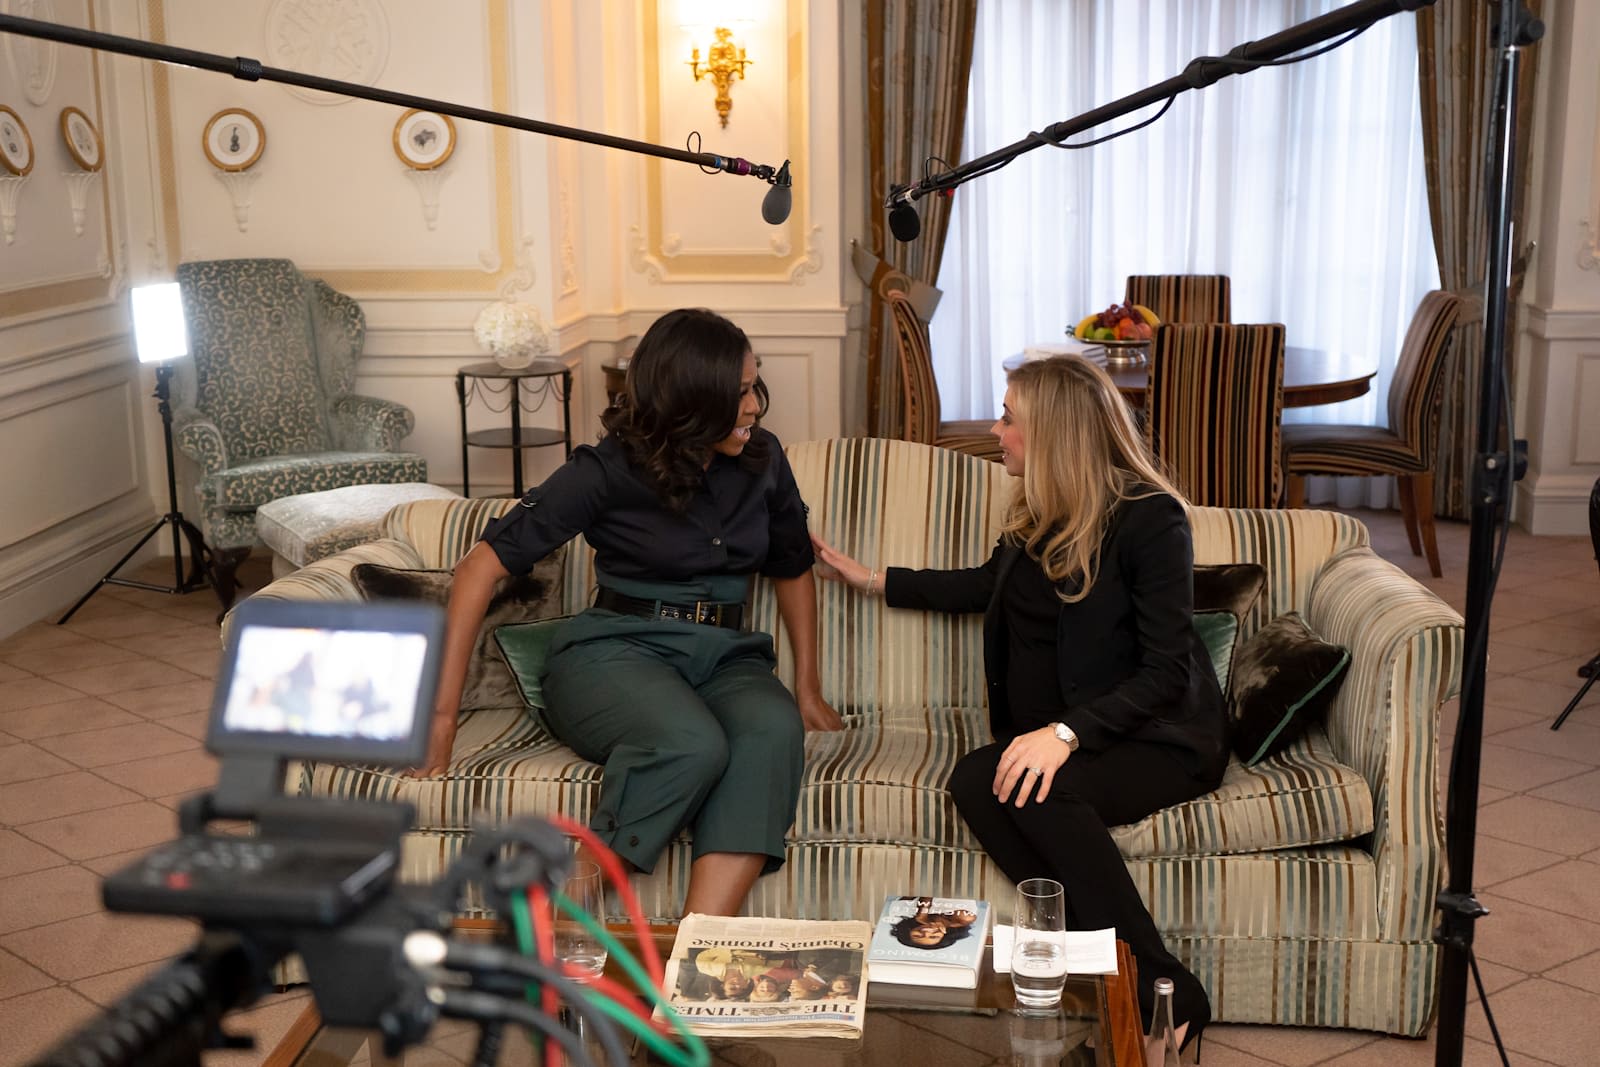 Michelle Obama and Holly Branson on couch - microphones and recording equipment in foreground 